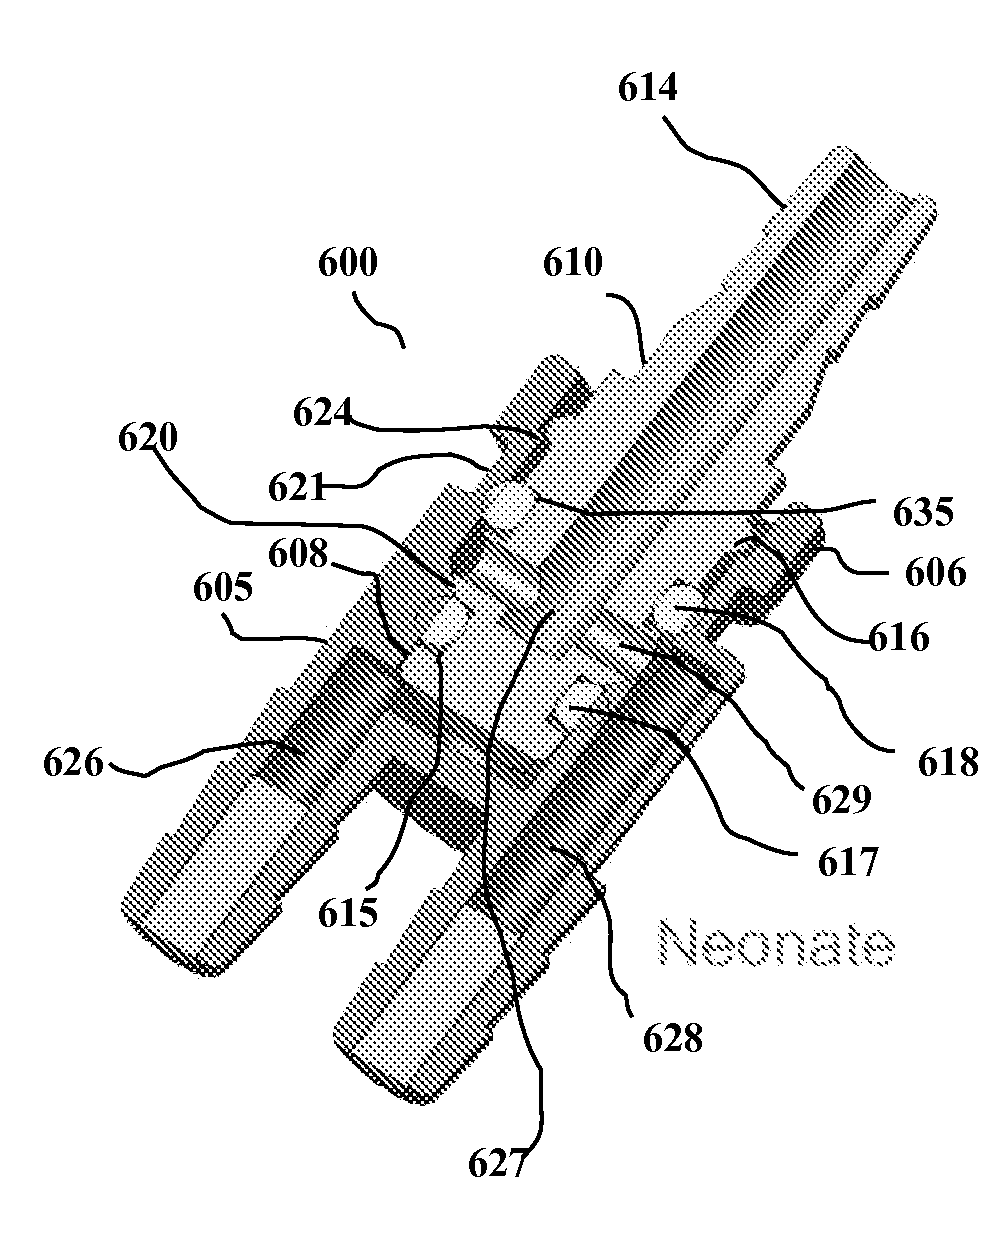 Air-Tight Push-In and Pull-Out Connector System with Positive Latching